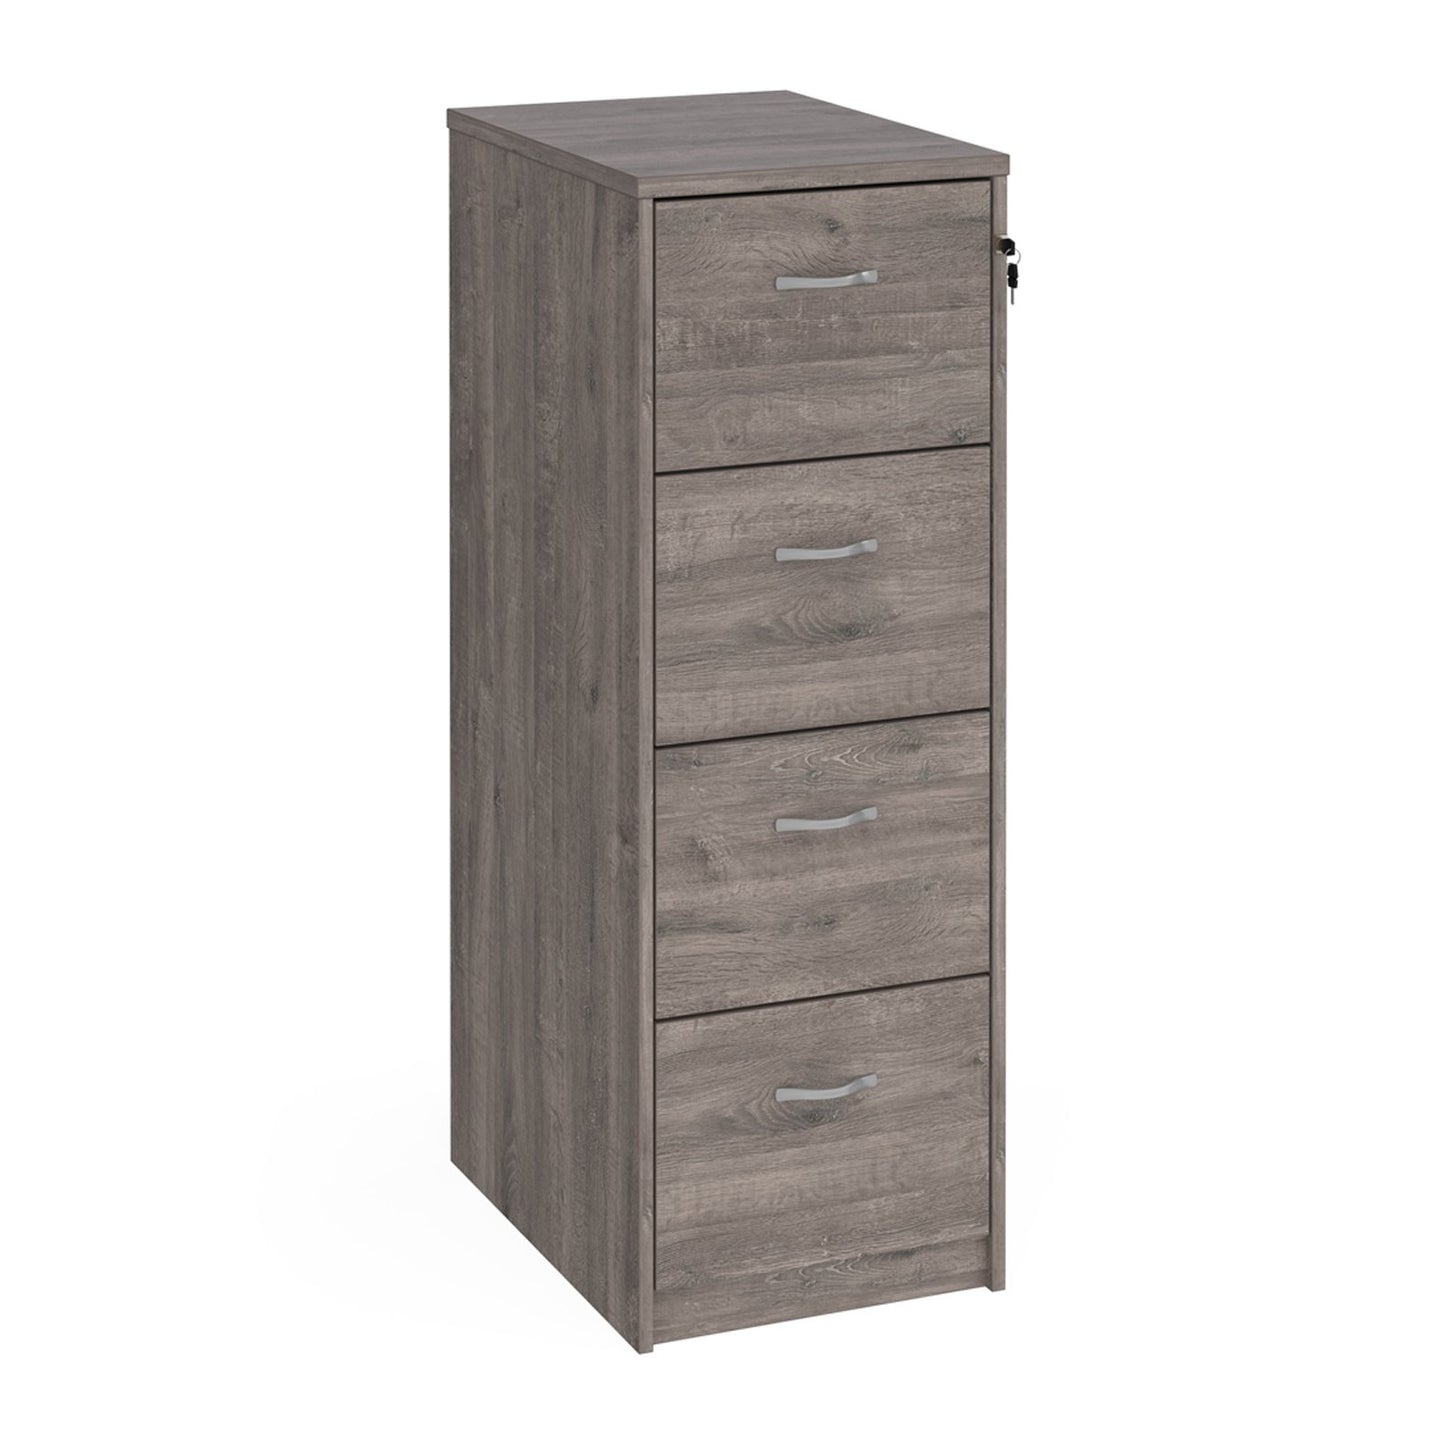 Wooden Filing Cabinet With Silver Handles - 4 Drawer - Walnut